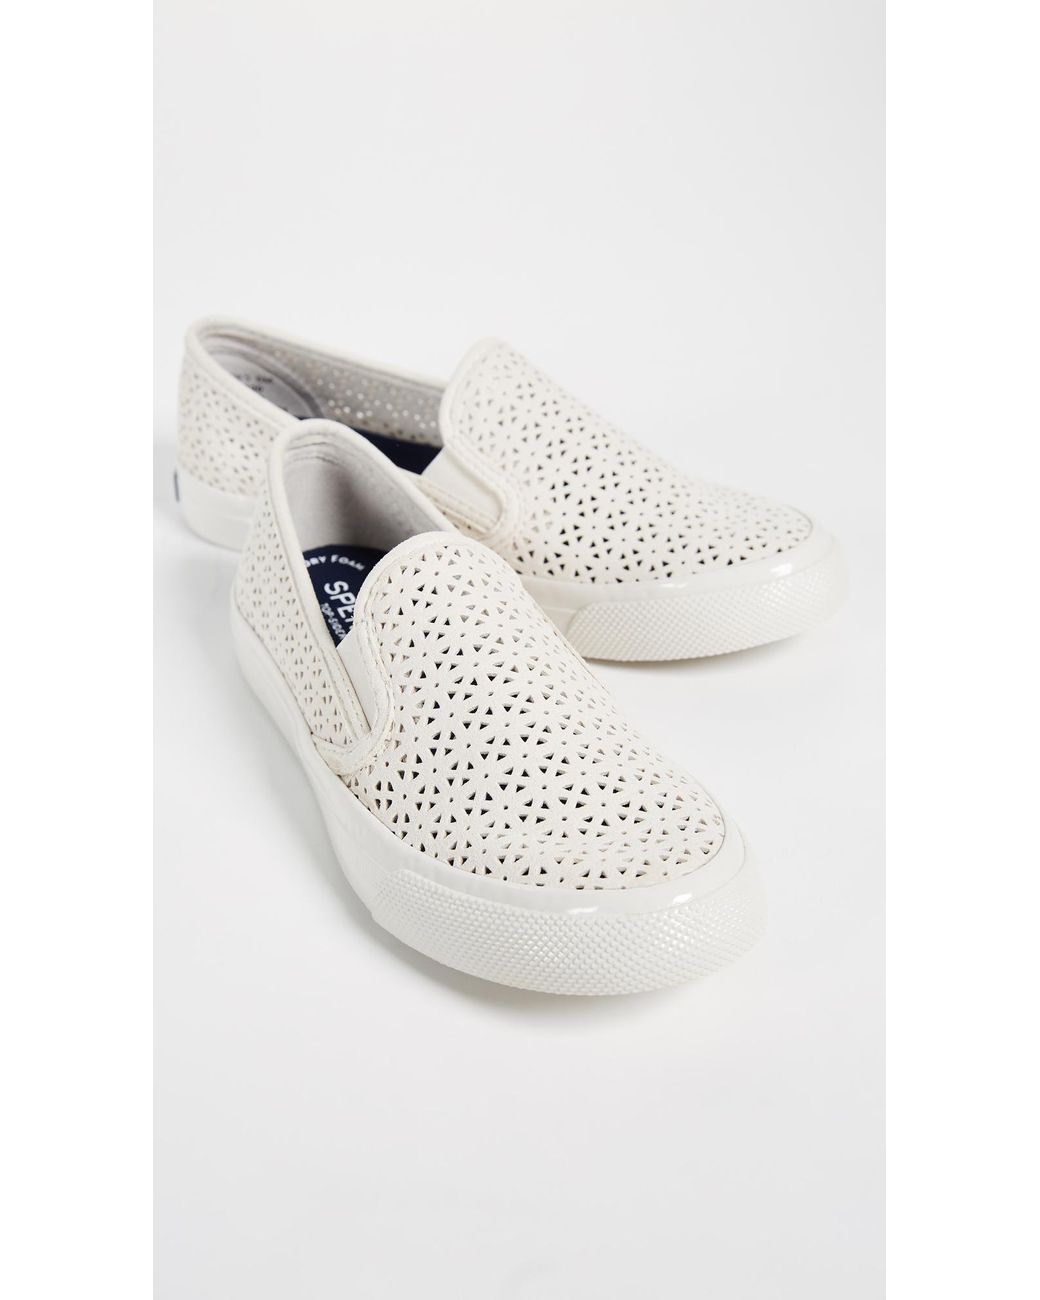 Sperry Women's Seaside Nautical Perforated Slip-On Sneaker Ivory Pick a Size 